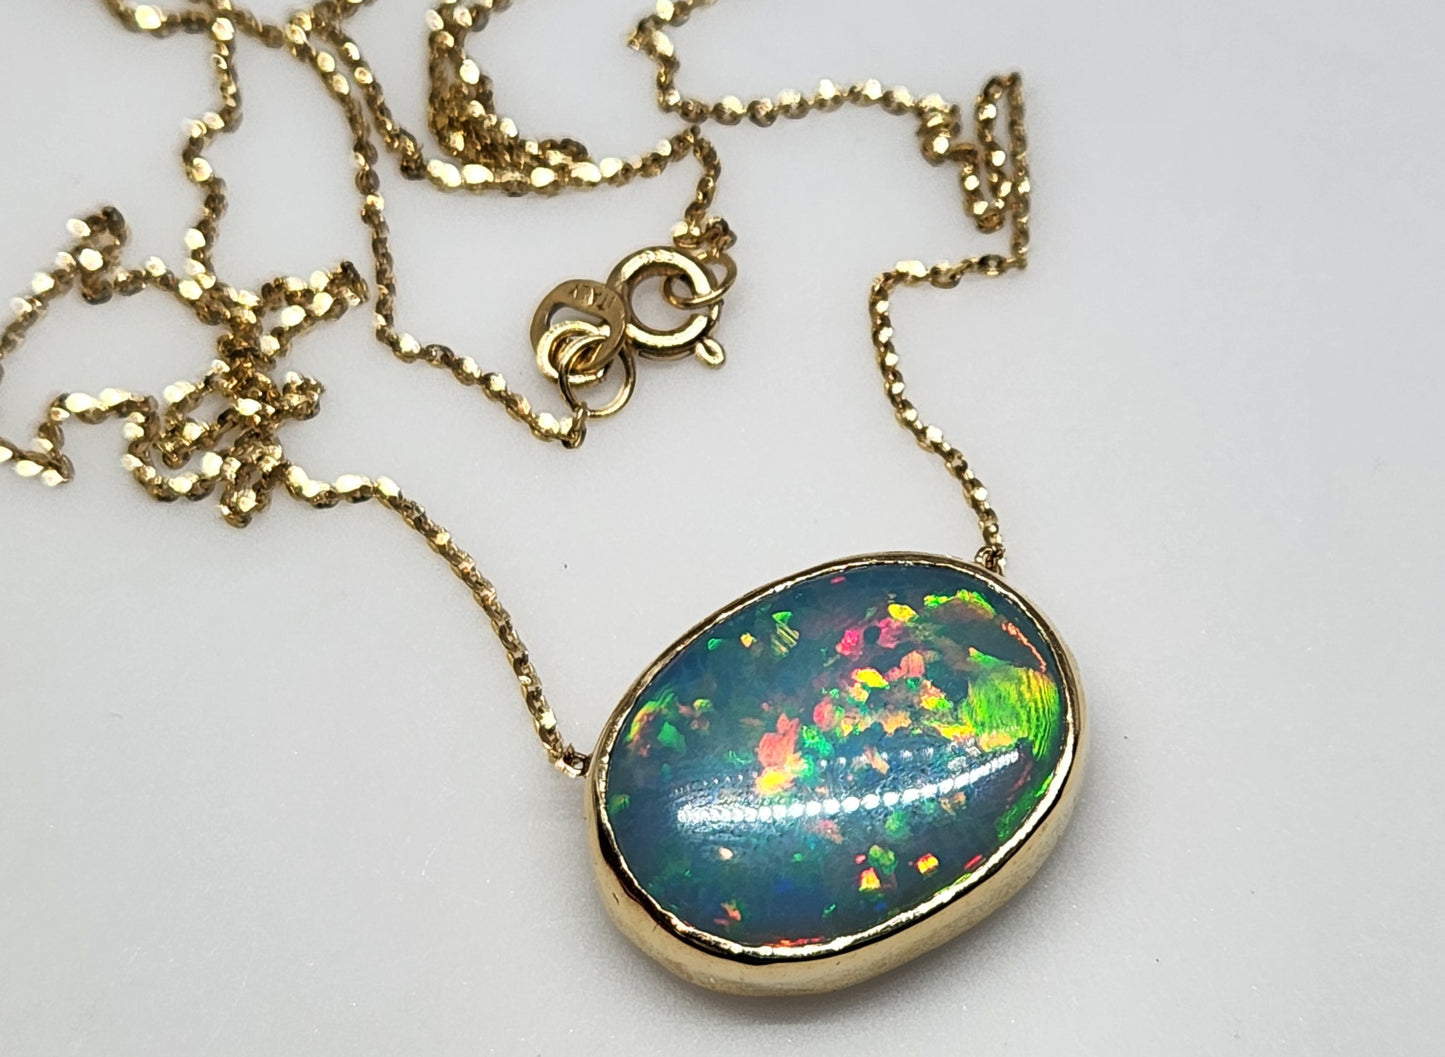 Blue Opal Pendant 14k Yellow Gold Chain Necklace #427